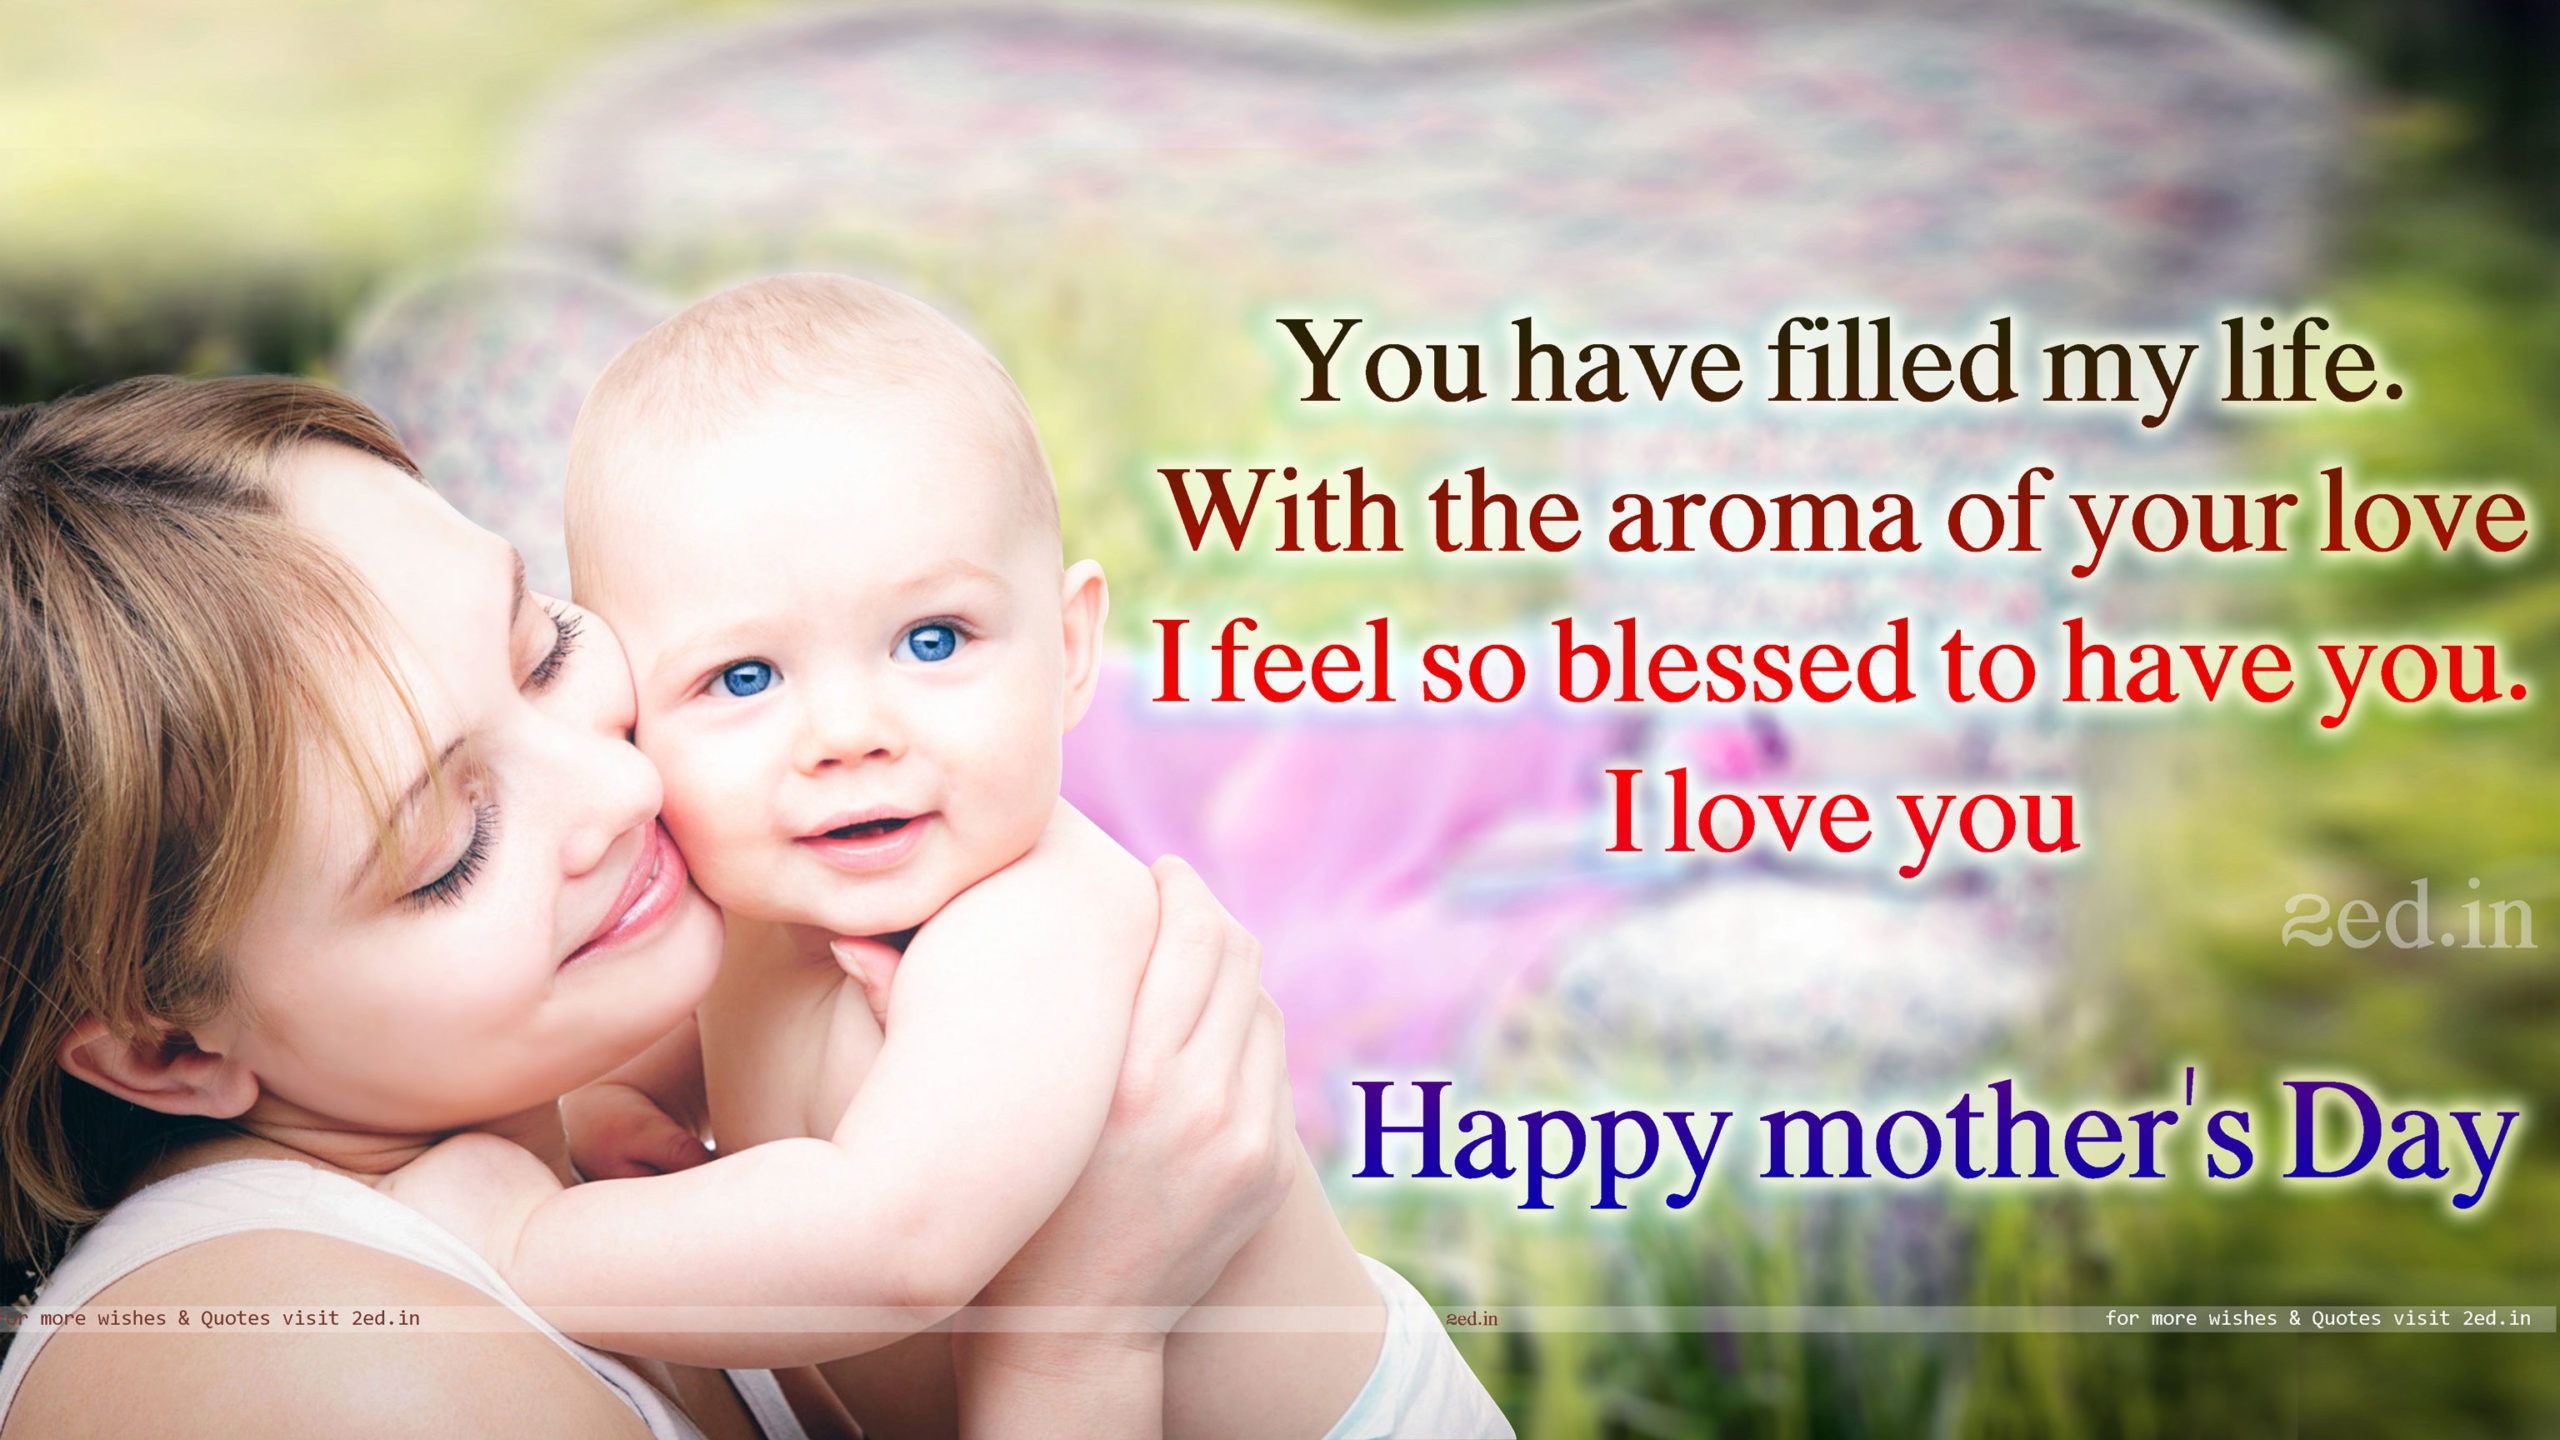 Best Mothers Day Wishes 2020 Quotes and HD Image